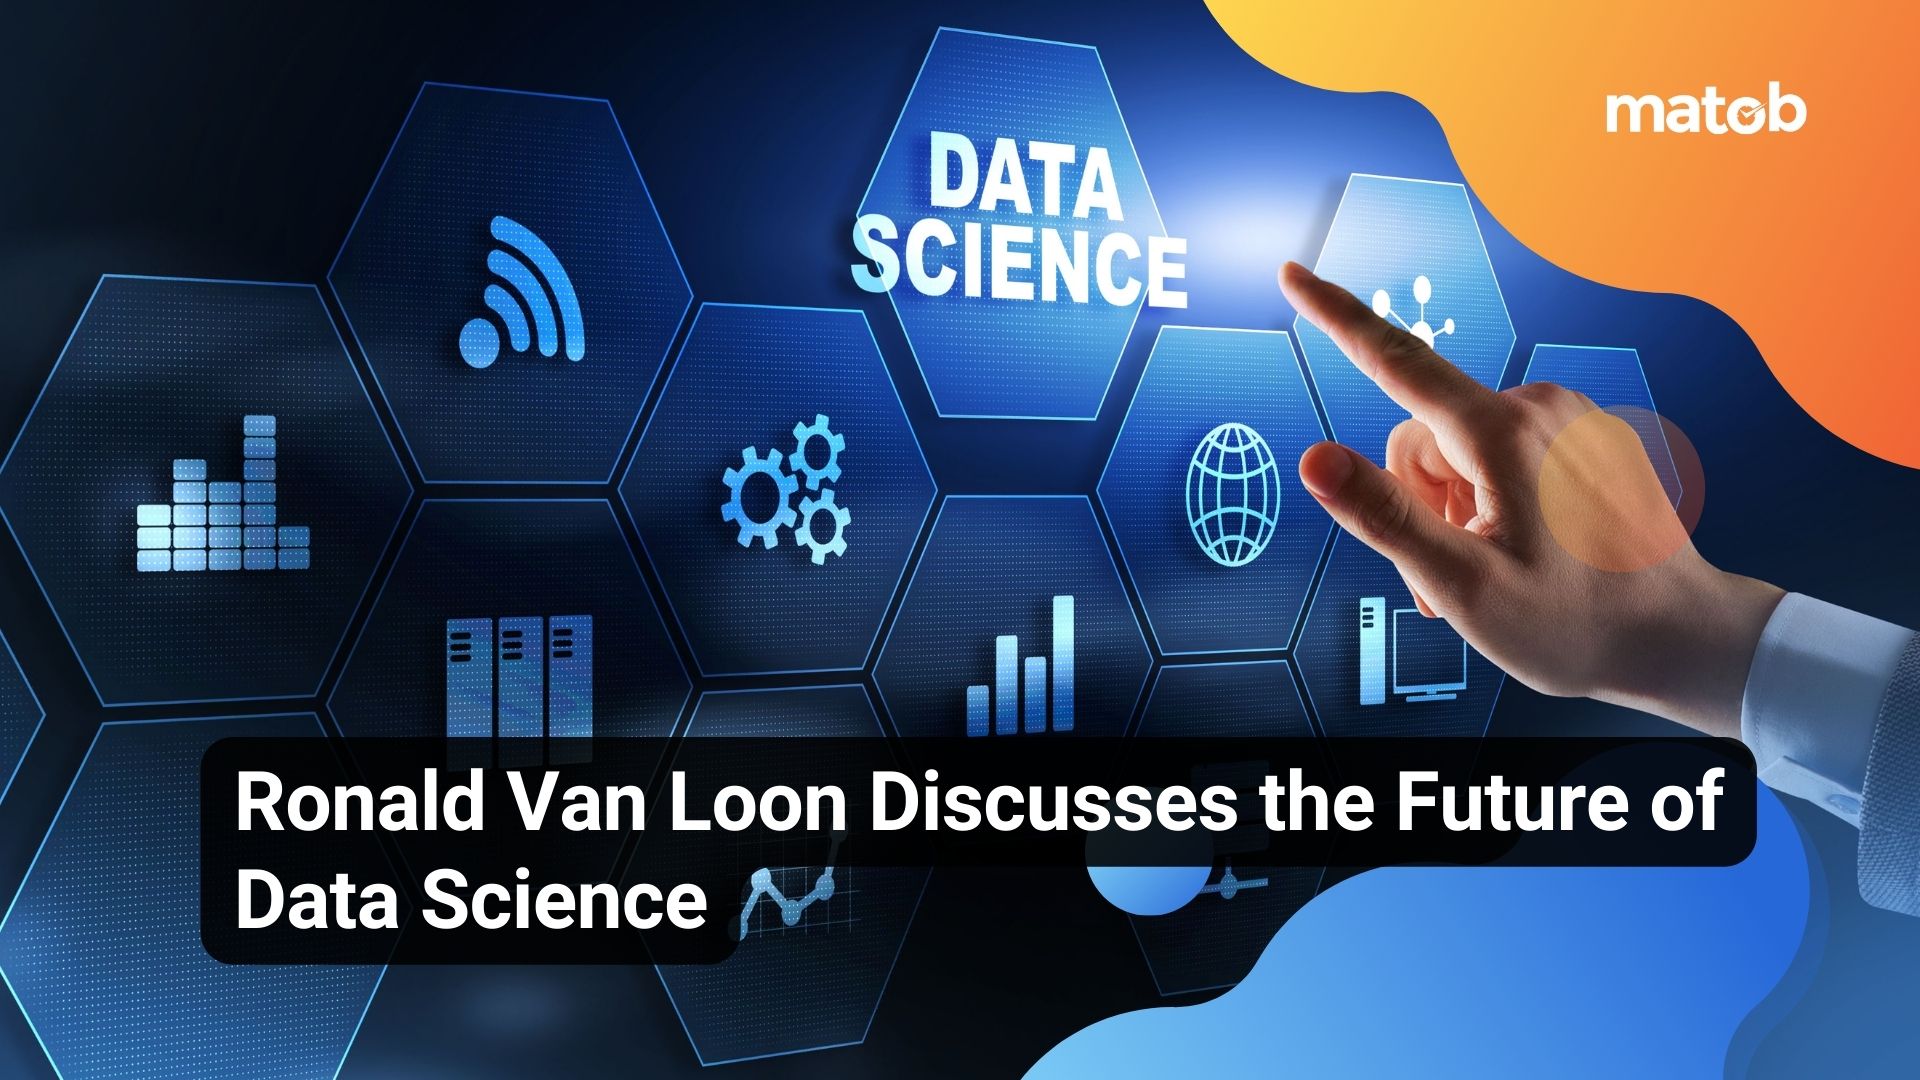 Ronald Van Loon Discusses the Future of Data Science